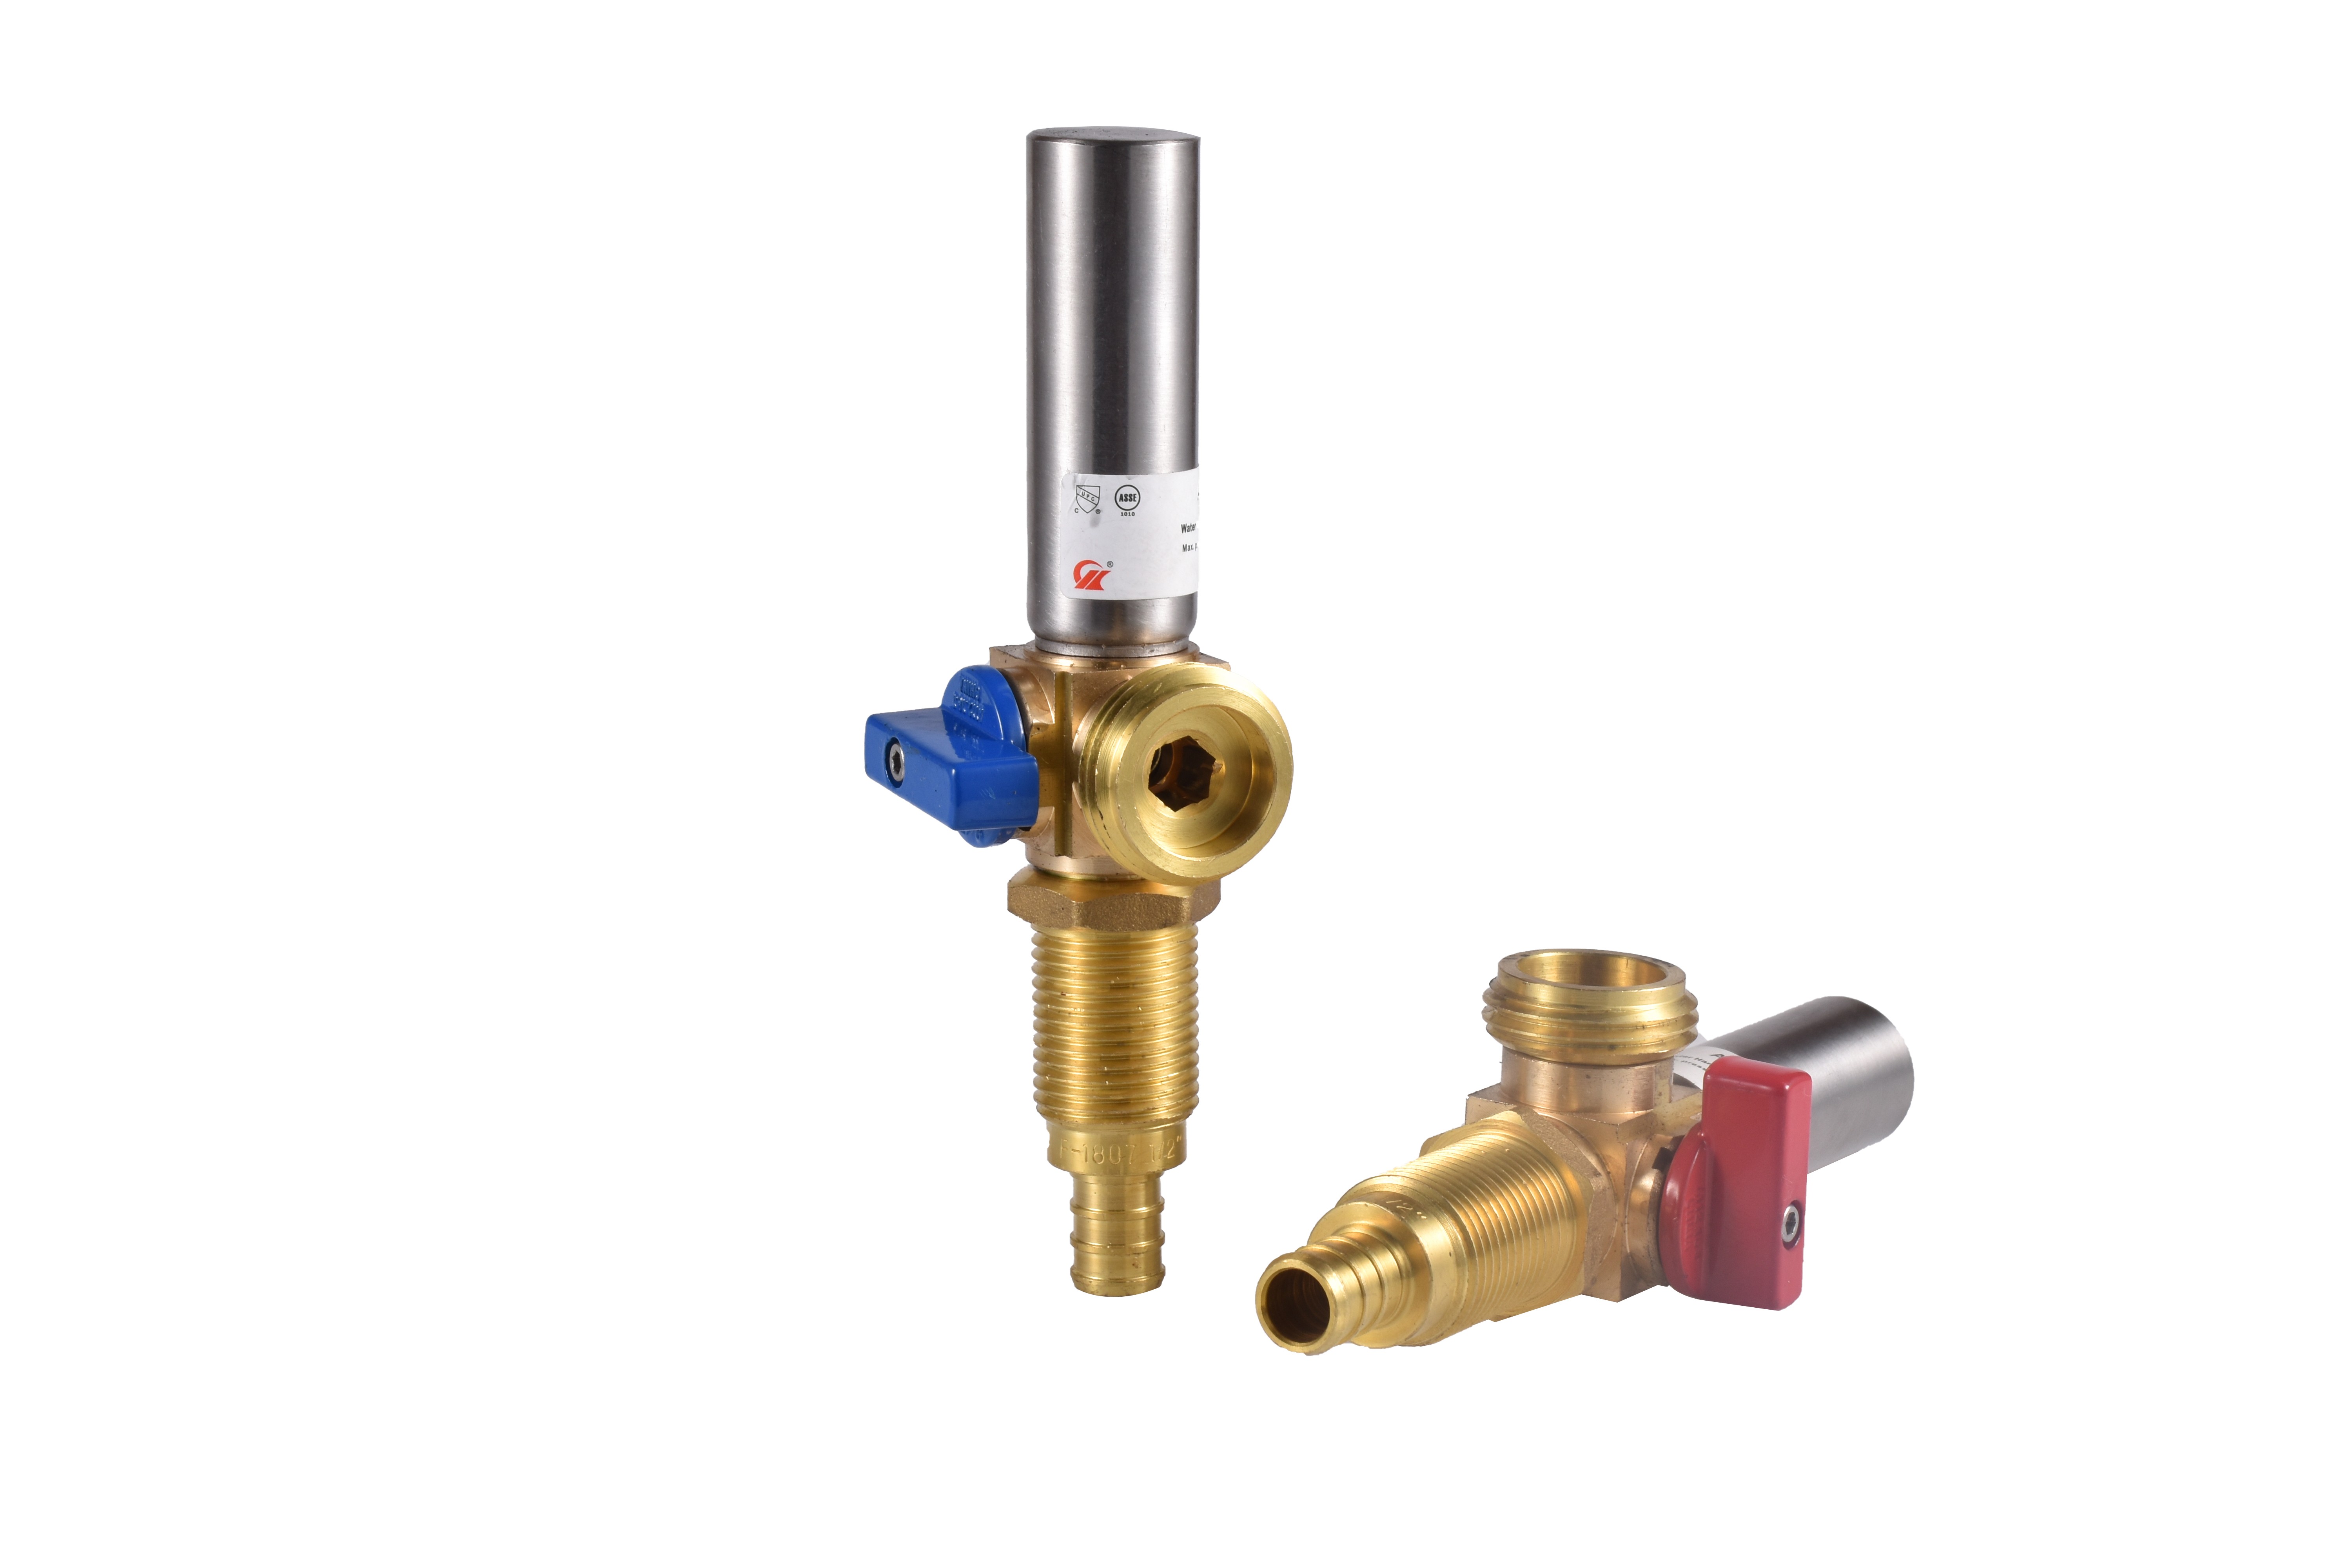 Valve with Stainless Steel Water Hammer Arrester 1/2" F-1807 Crimp Pex x 3/4" MHT Left Blue and Right Red Handle